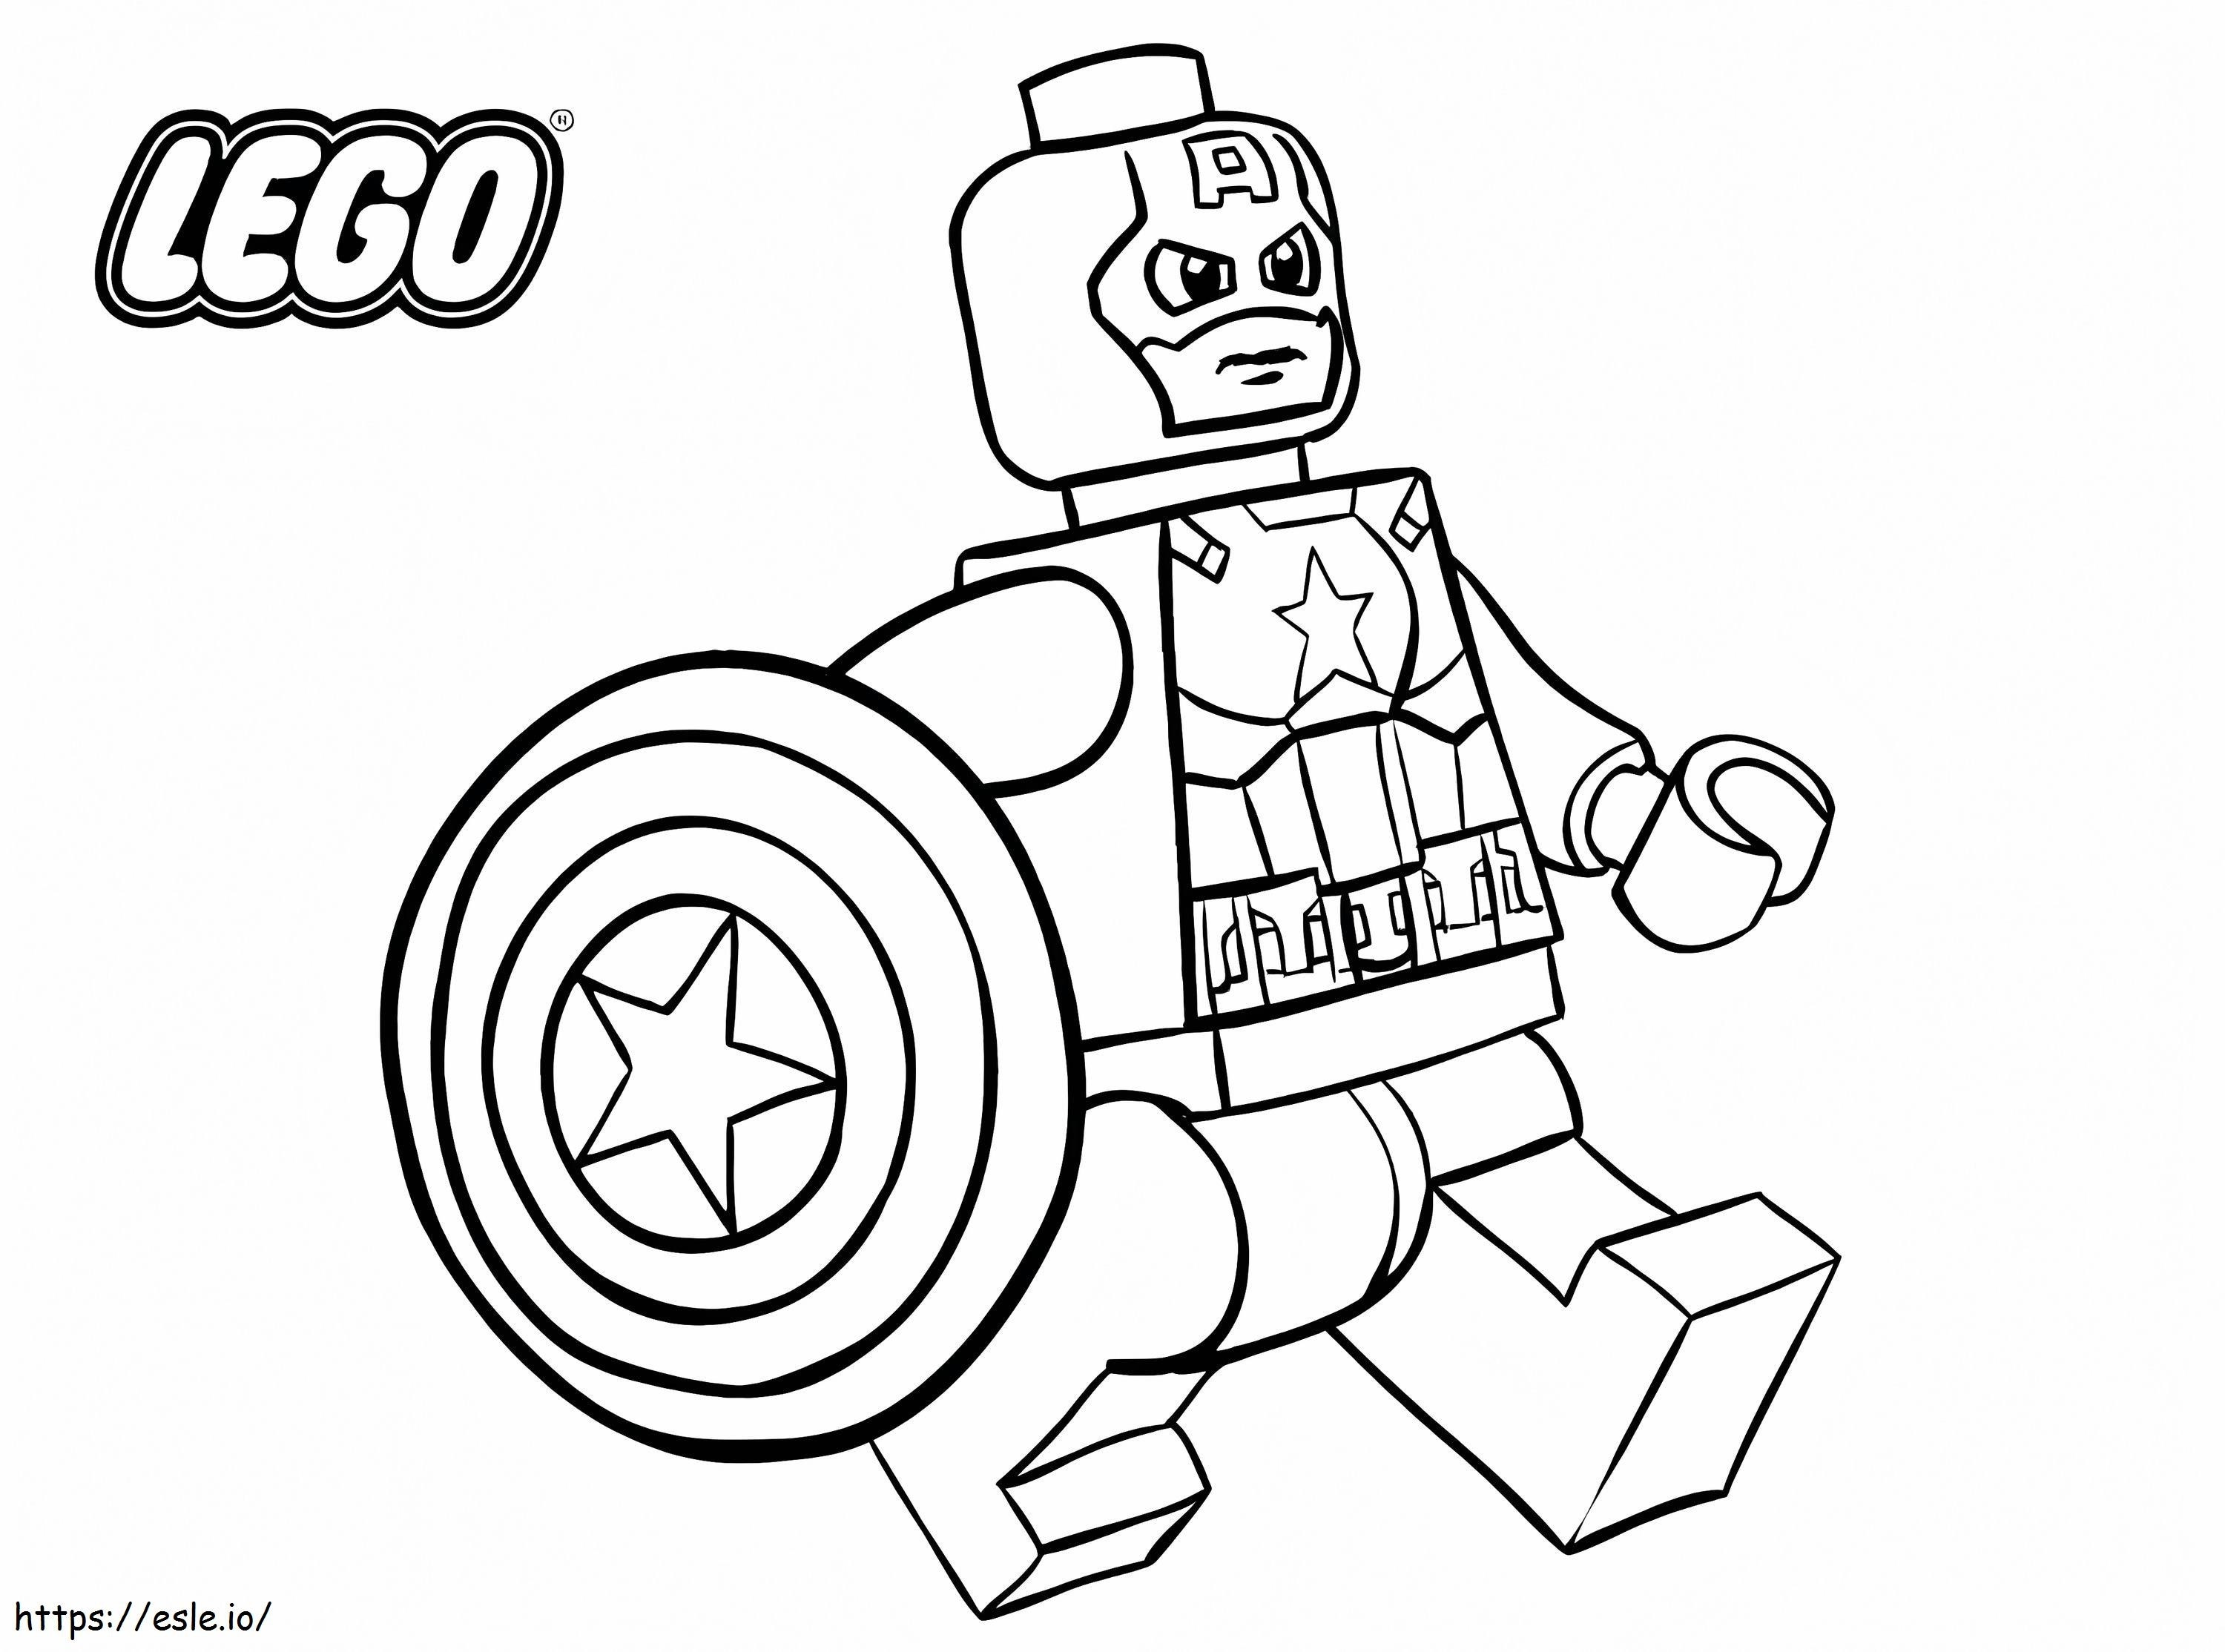 Lego Captain America Walking coloring page